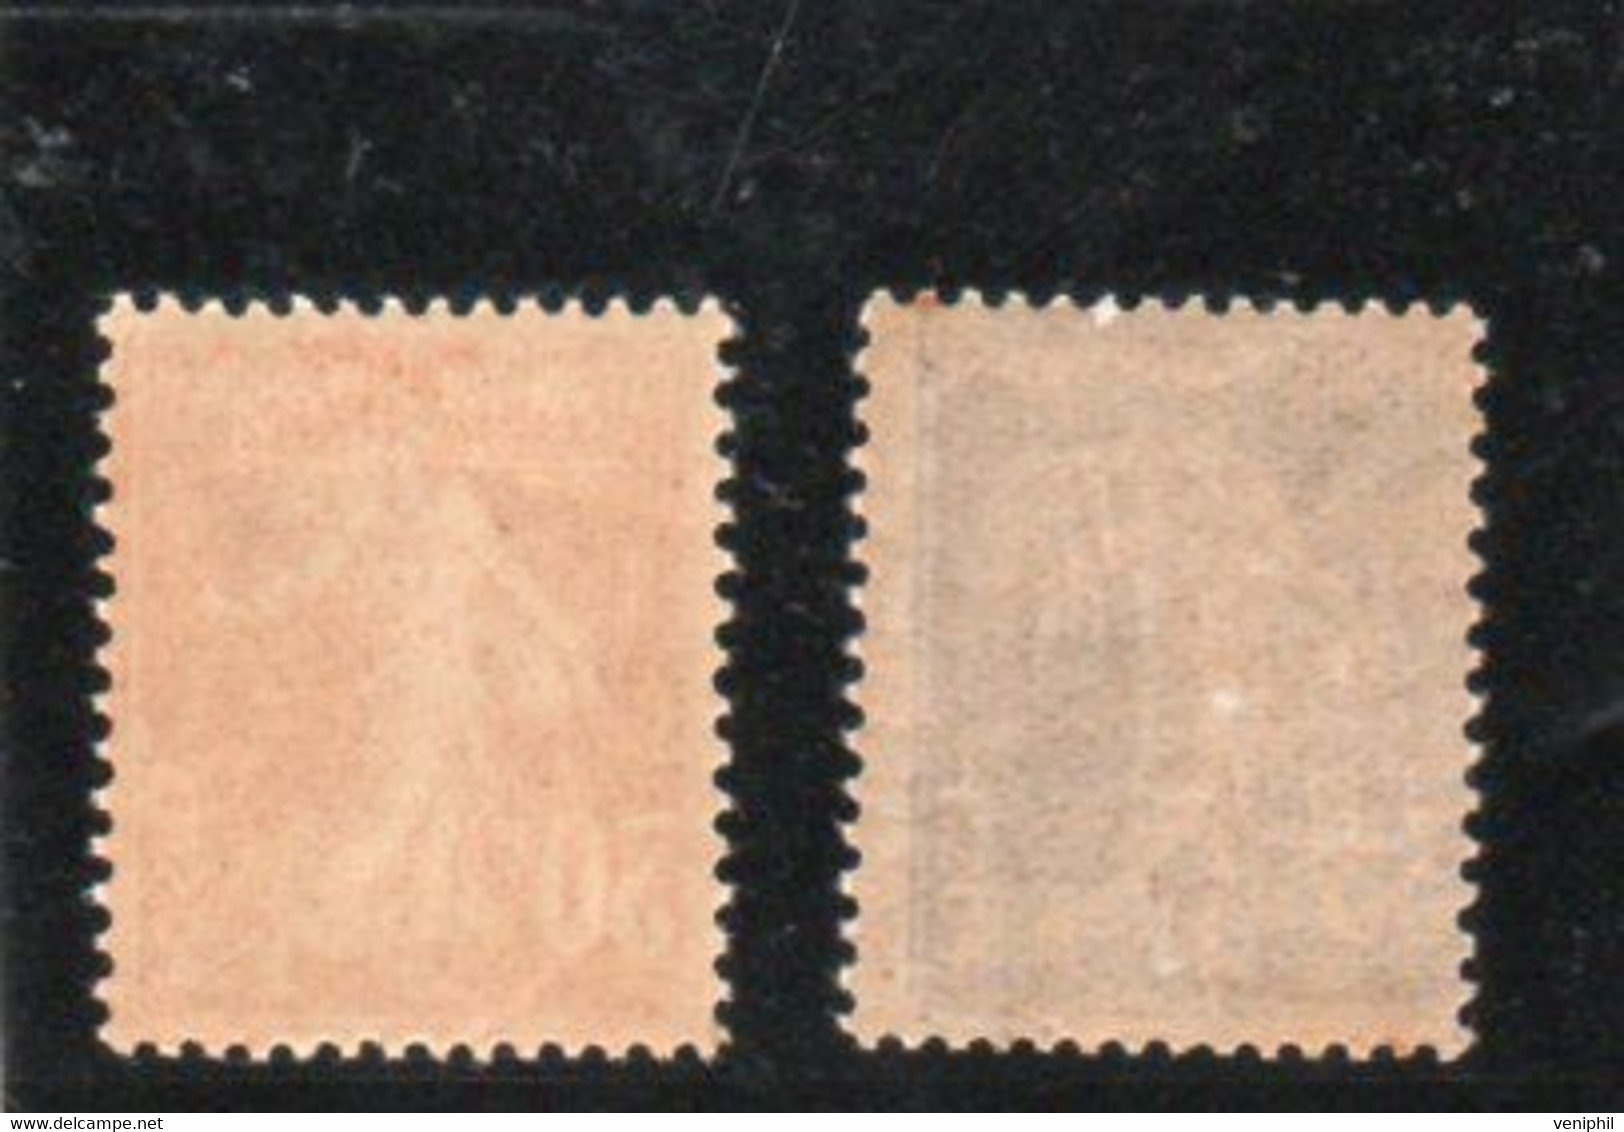 TIMBRES SEMEUSE CAMEE N° 141-142 NEUF TRES INFIME CHARNIERE ANNEE 1907 - COTE : 28 € - 1906-38 Semeuse Con Cameo